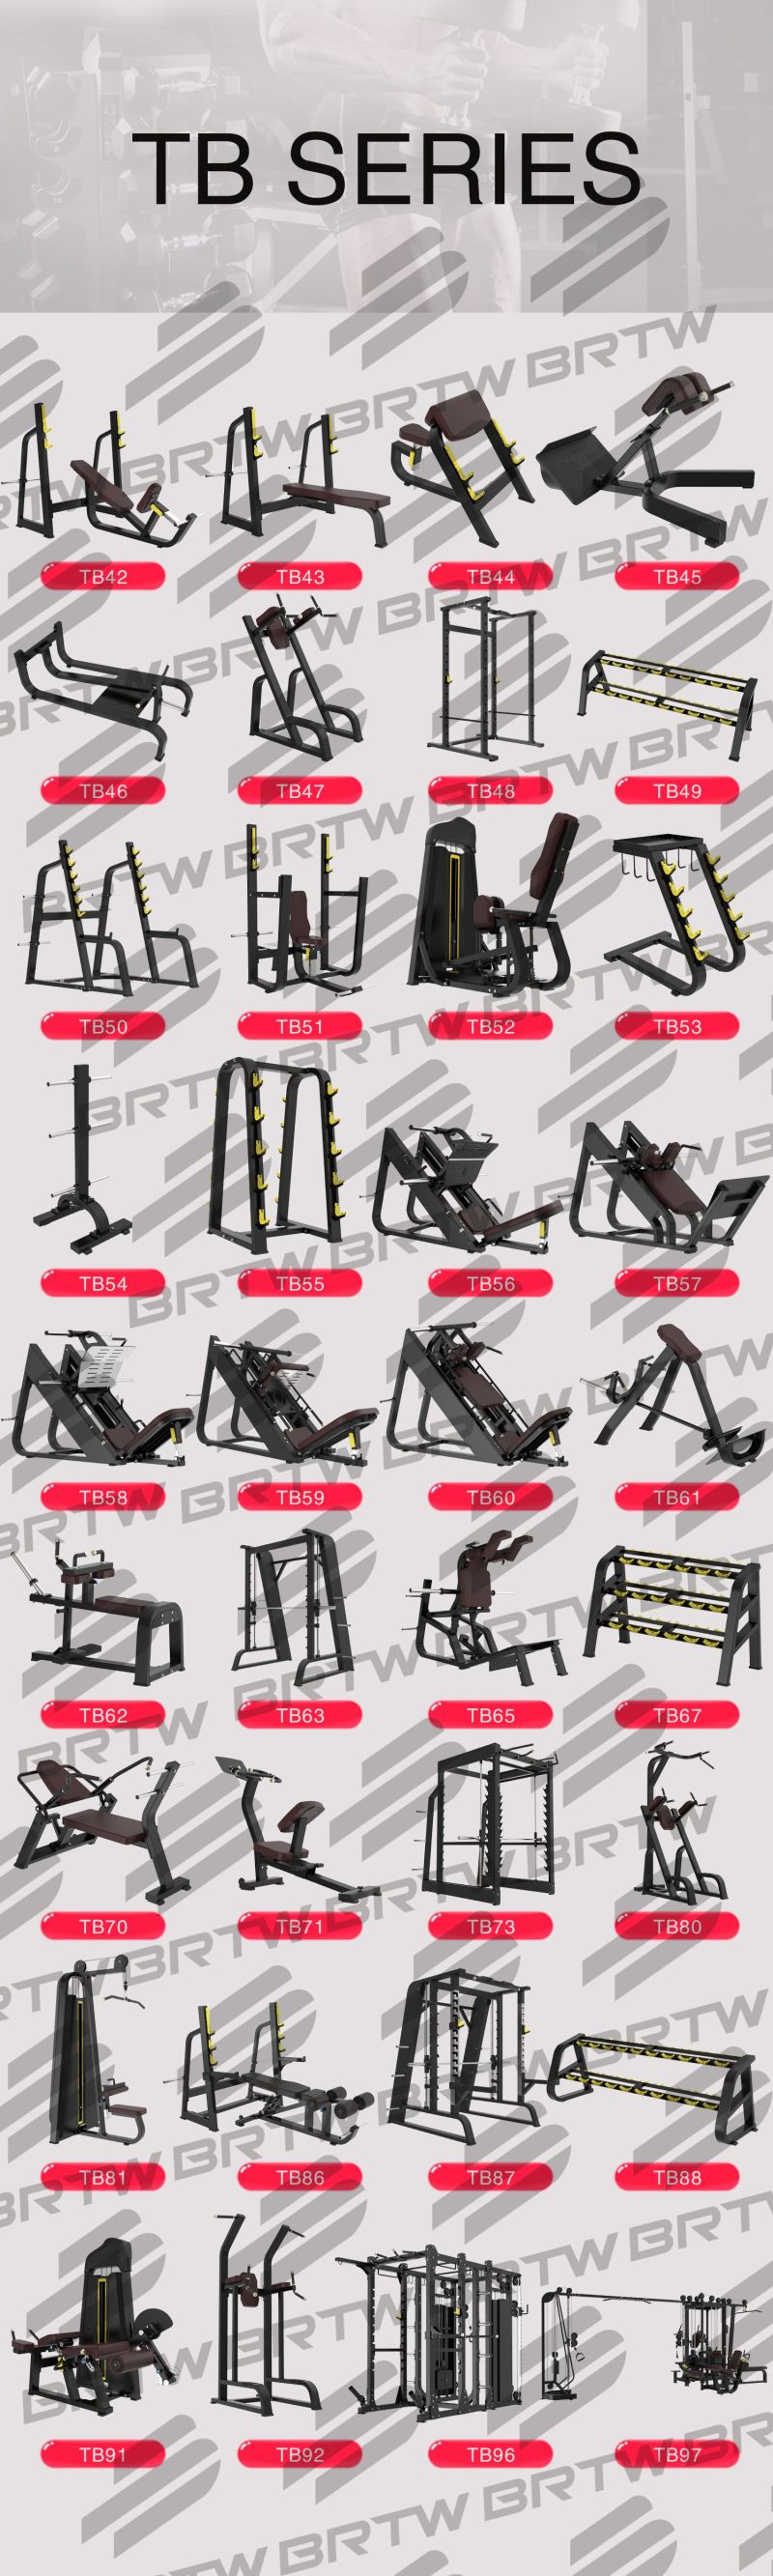 Ce Certificated Gym Used Smith Machine Commercial Fitness Equipment